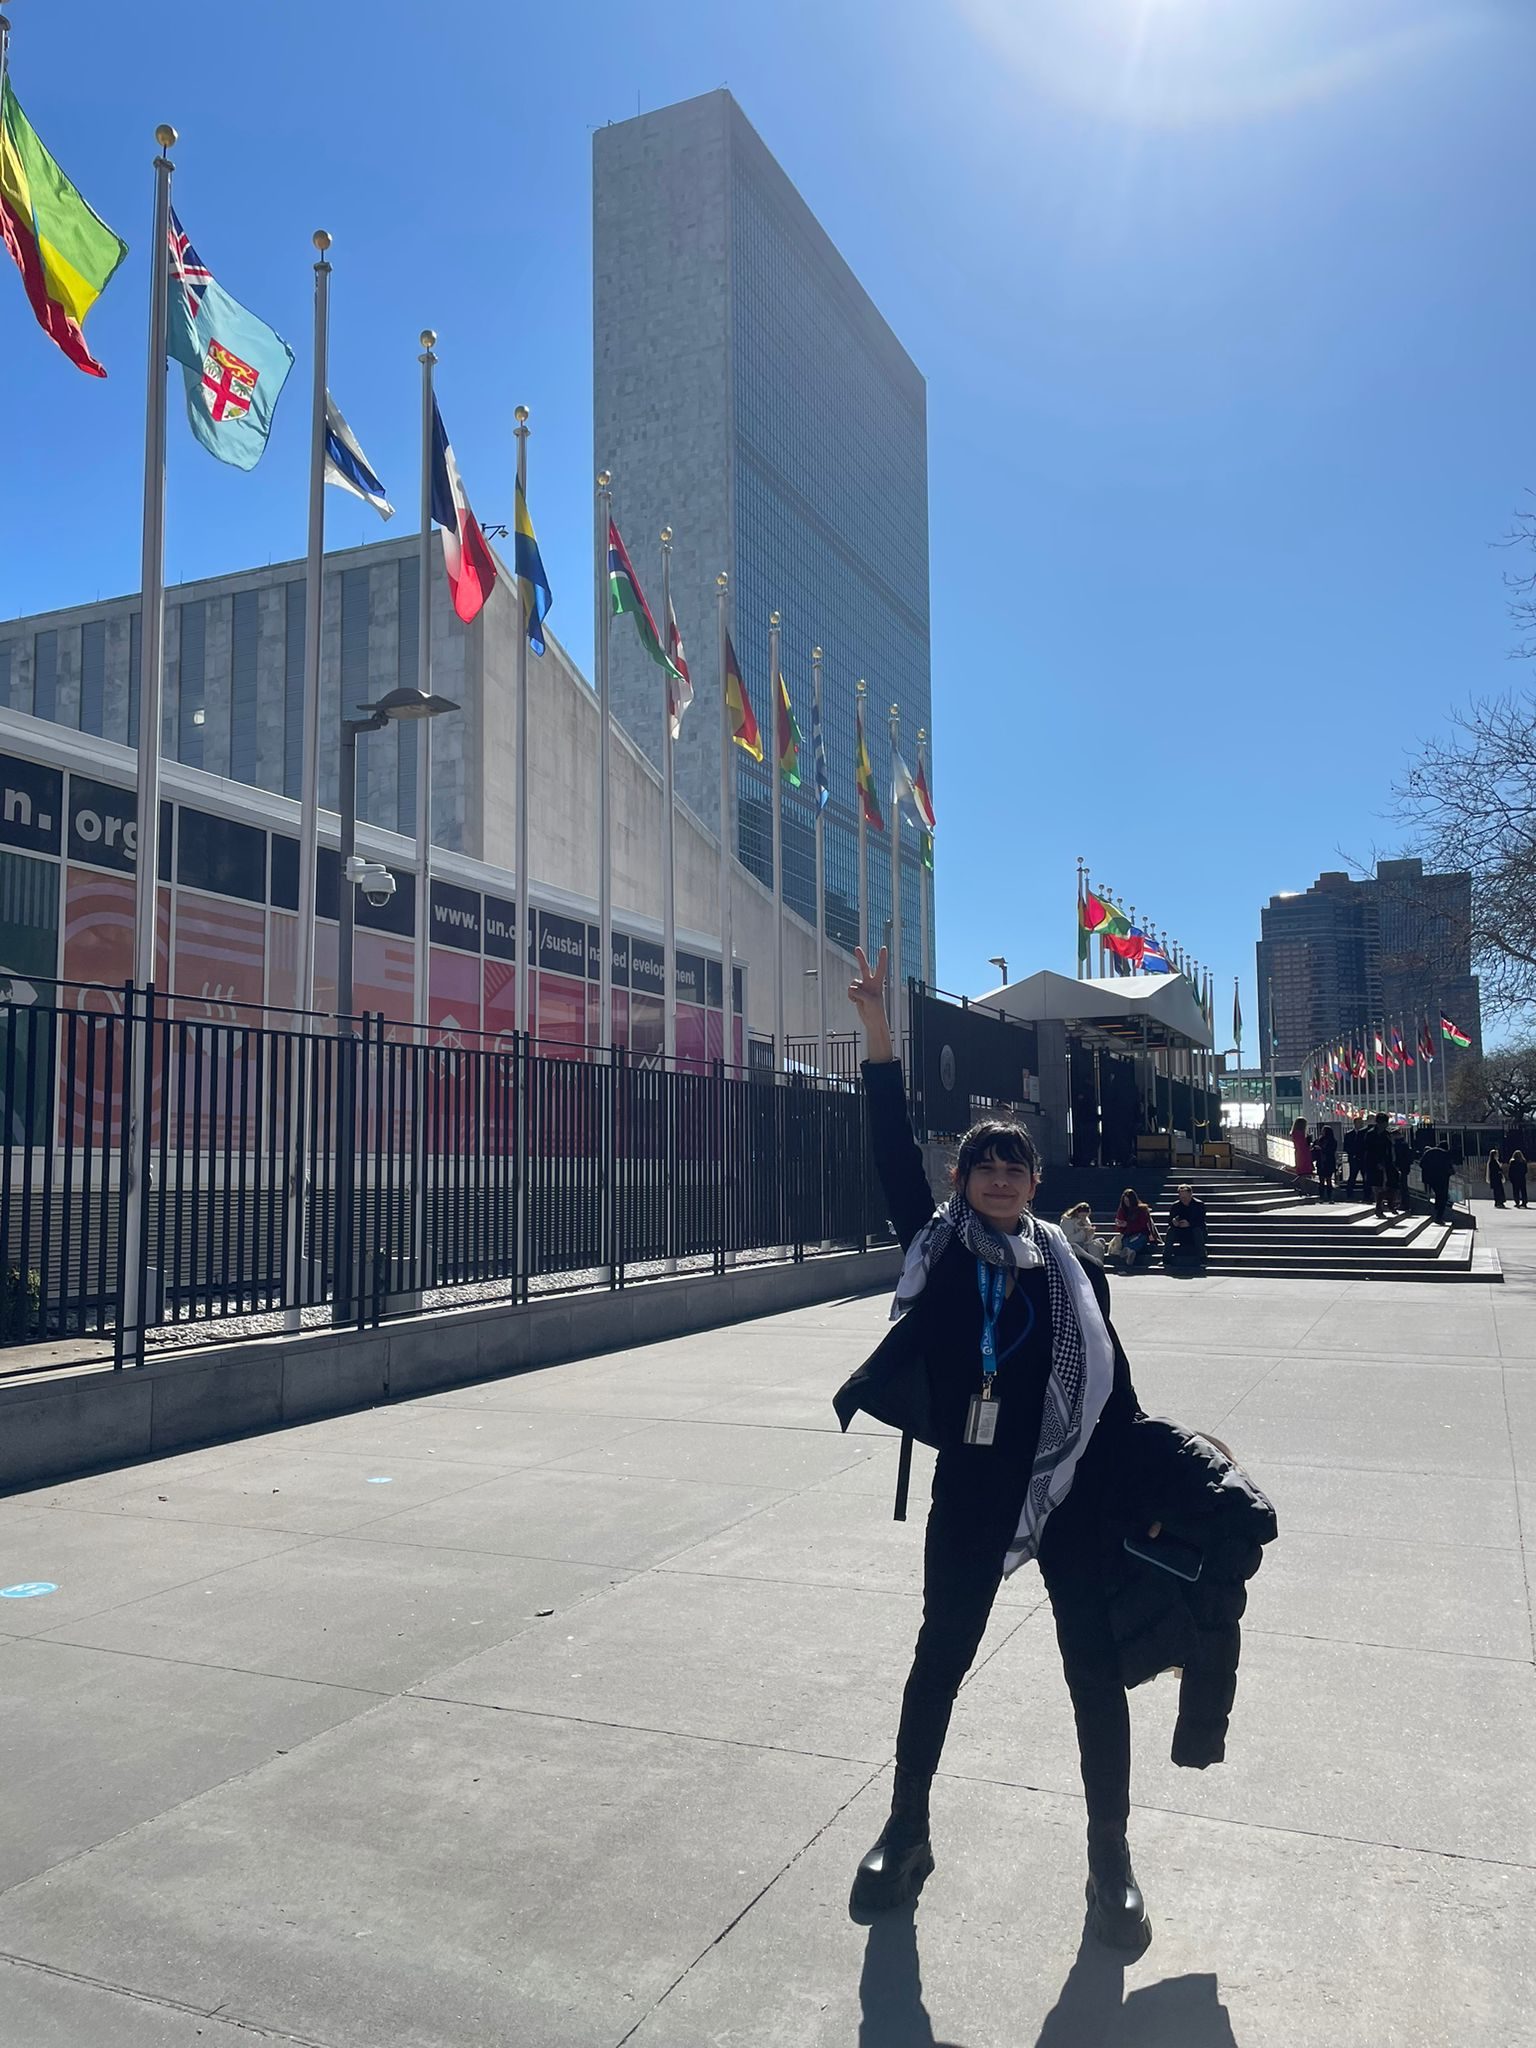 Youth Advocate Lilian poses in front of the UNHQ